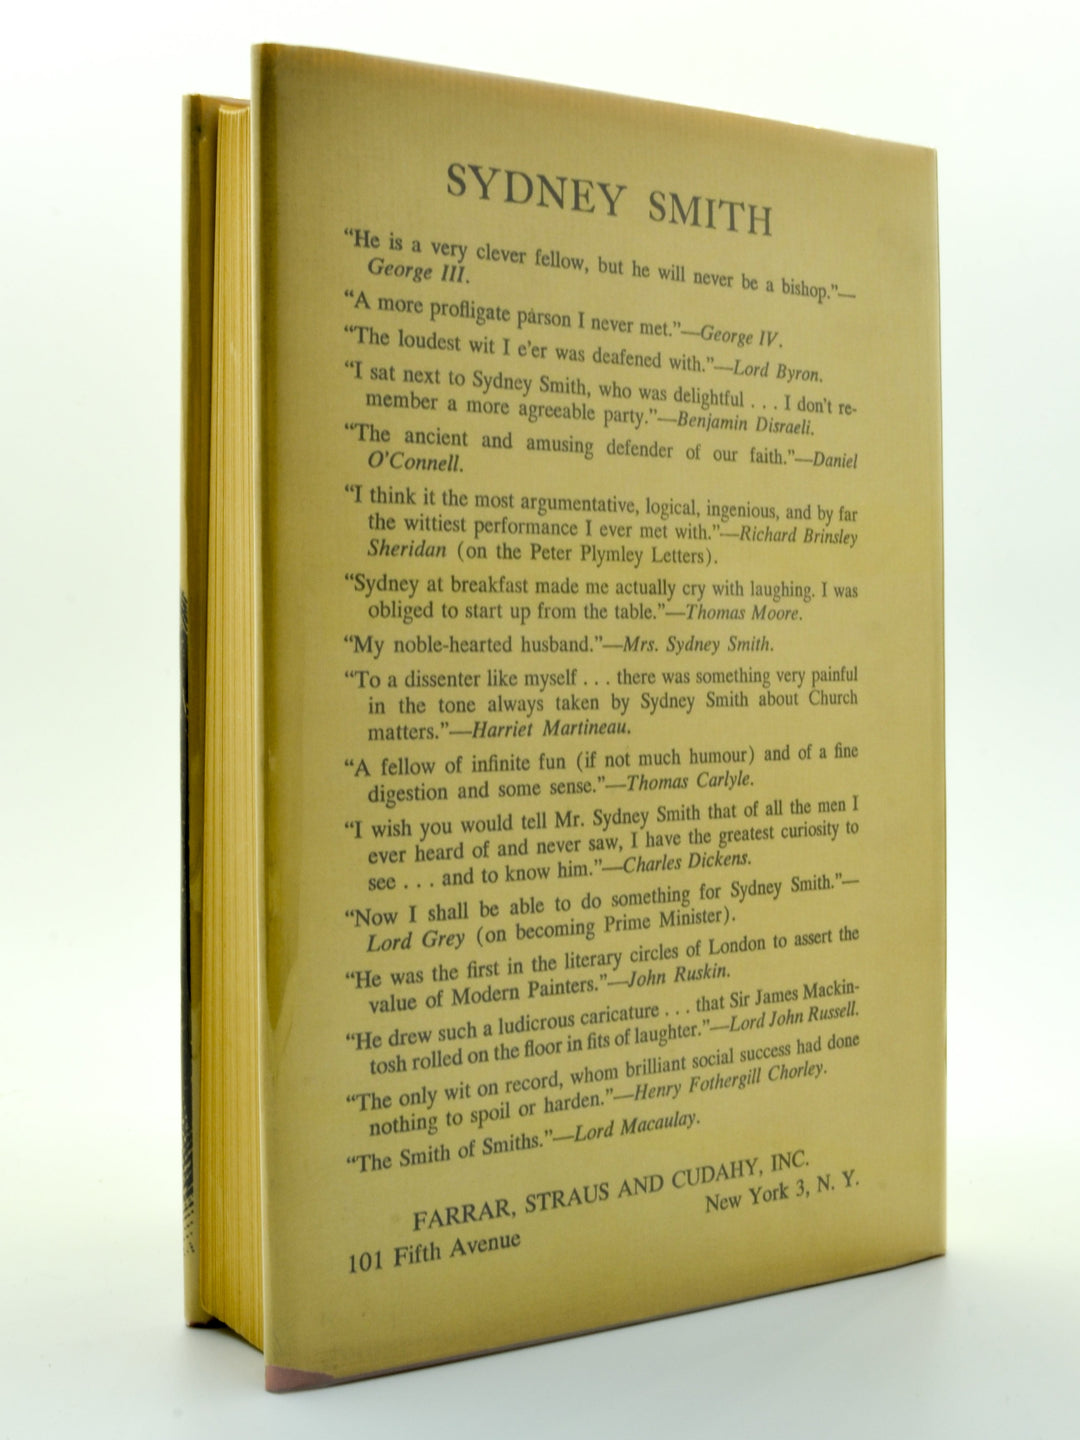 Smith, Sydney - The Selected Writings of Sydney Smith | image4